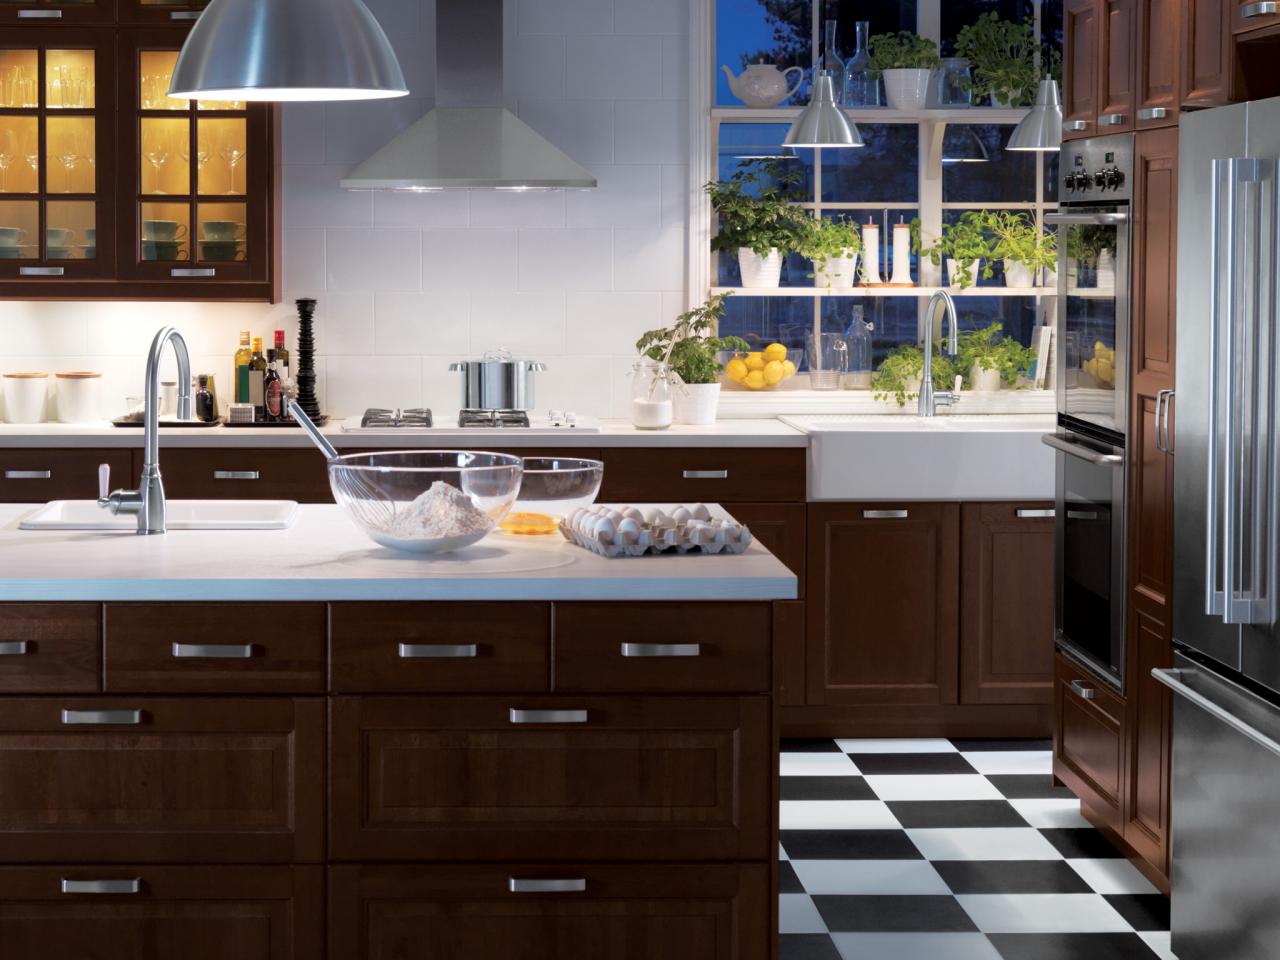 Durability and Practicality, Modular Kitchen Cabinets – Affordability